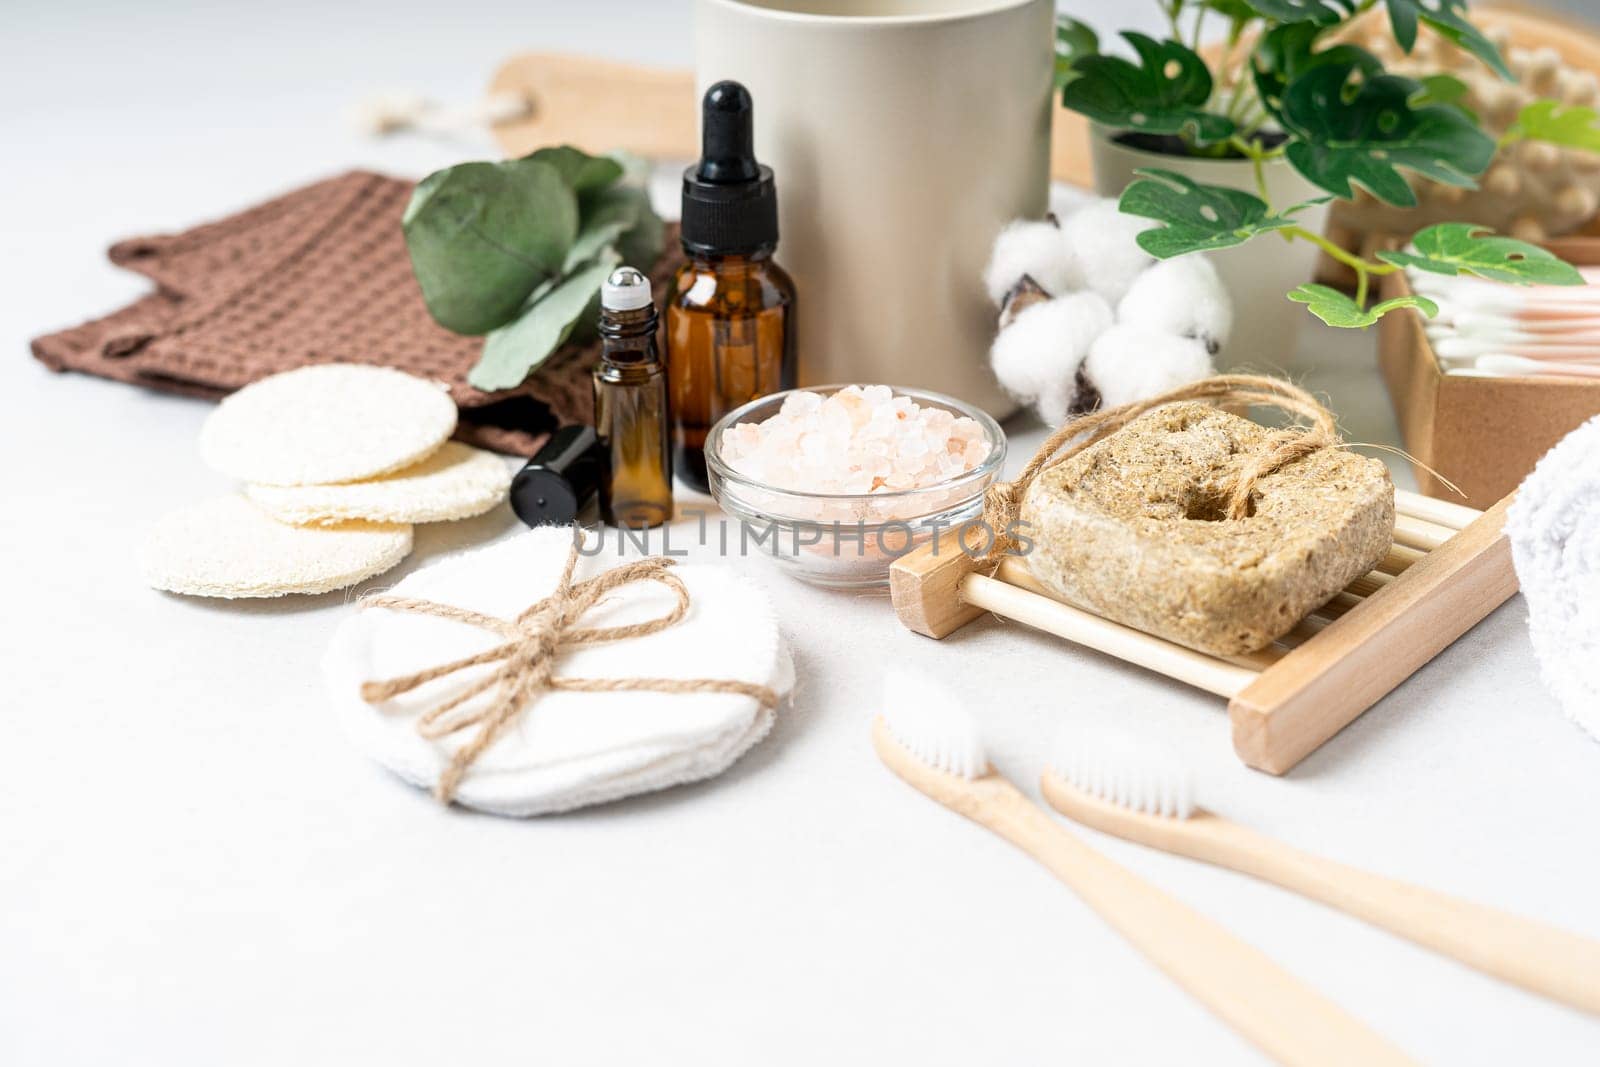 Natural bathroom and home spa tools. Zero waste sustainable lifestyle concept. Bamboo toothbrush, natural shampoo, cotton pads, homemade DIY beauty products in reusable bottles on white background.